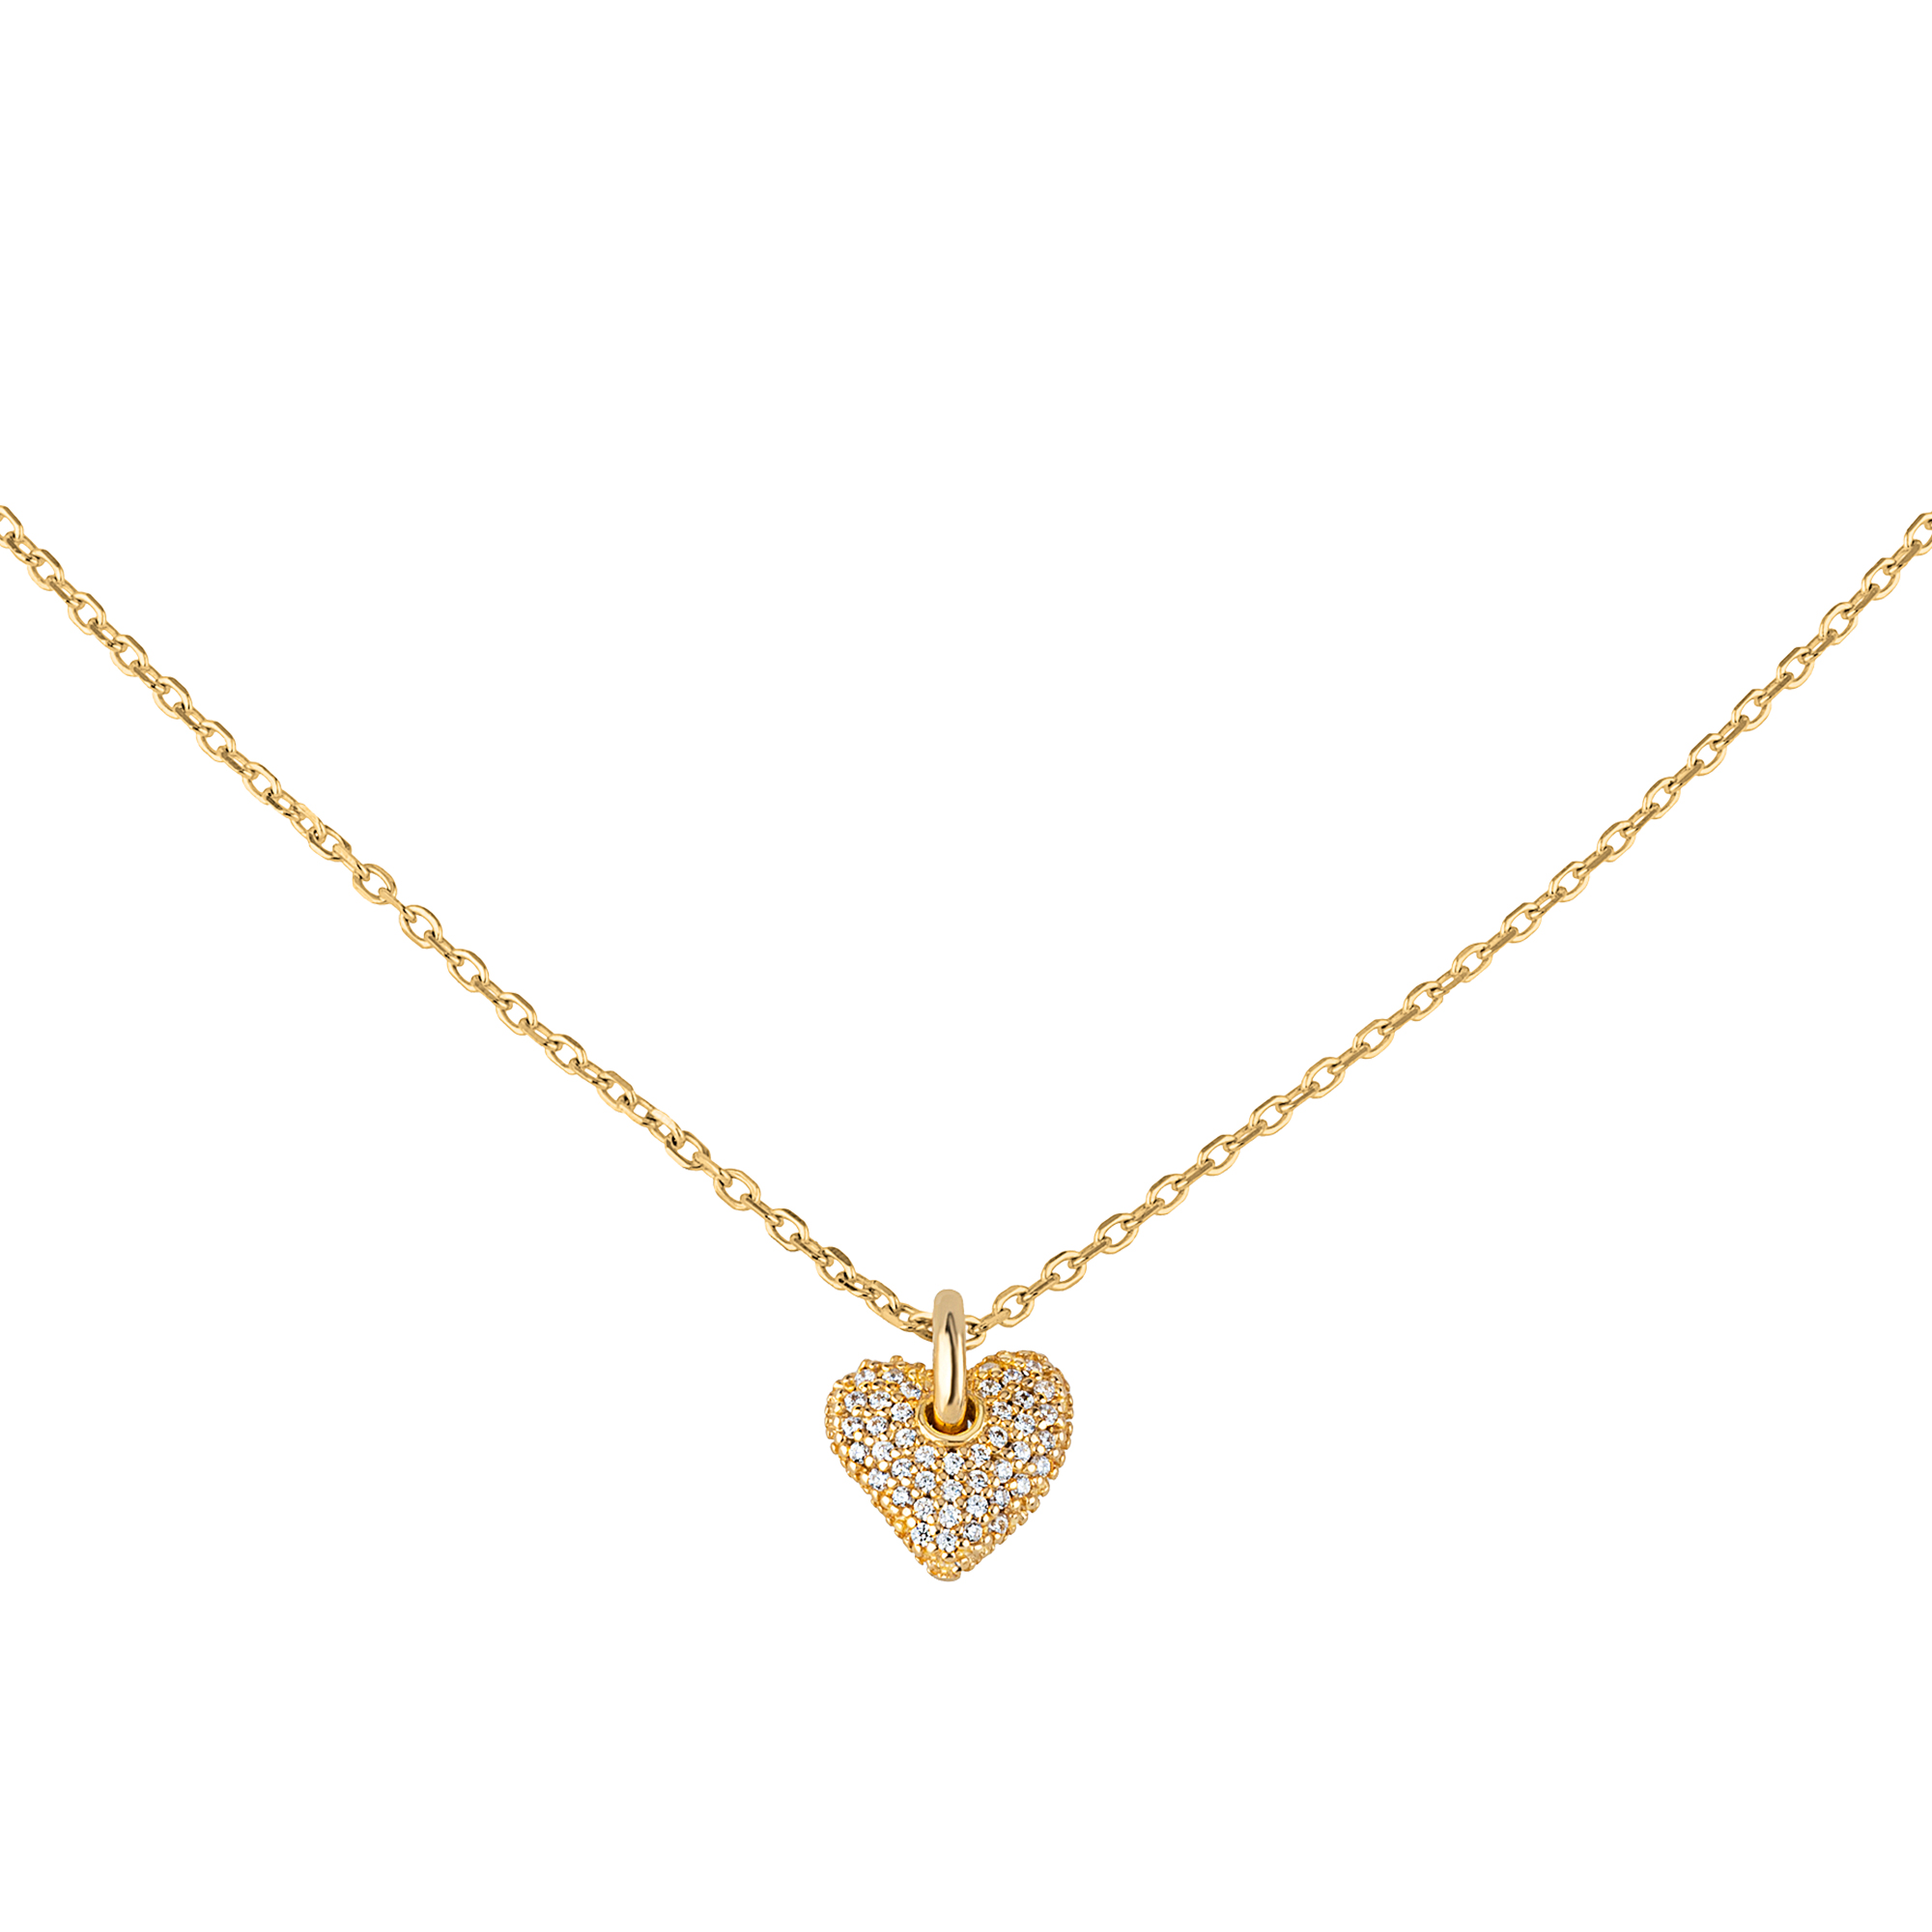 DARLING - 18K GOLD PLATED SILVER CHAIN AND PENDANT WITH CUBIC ZIRCONIA - 2 - TJ3156 | Breil